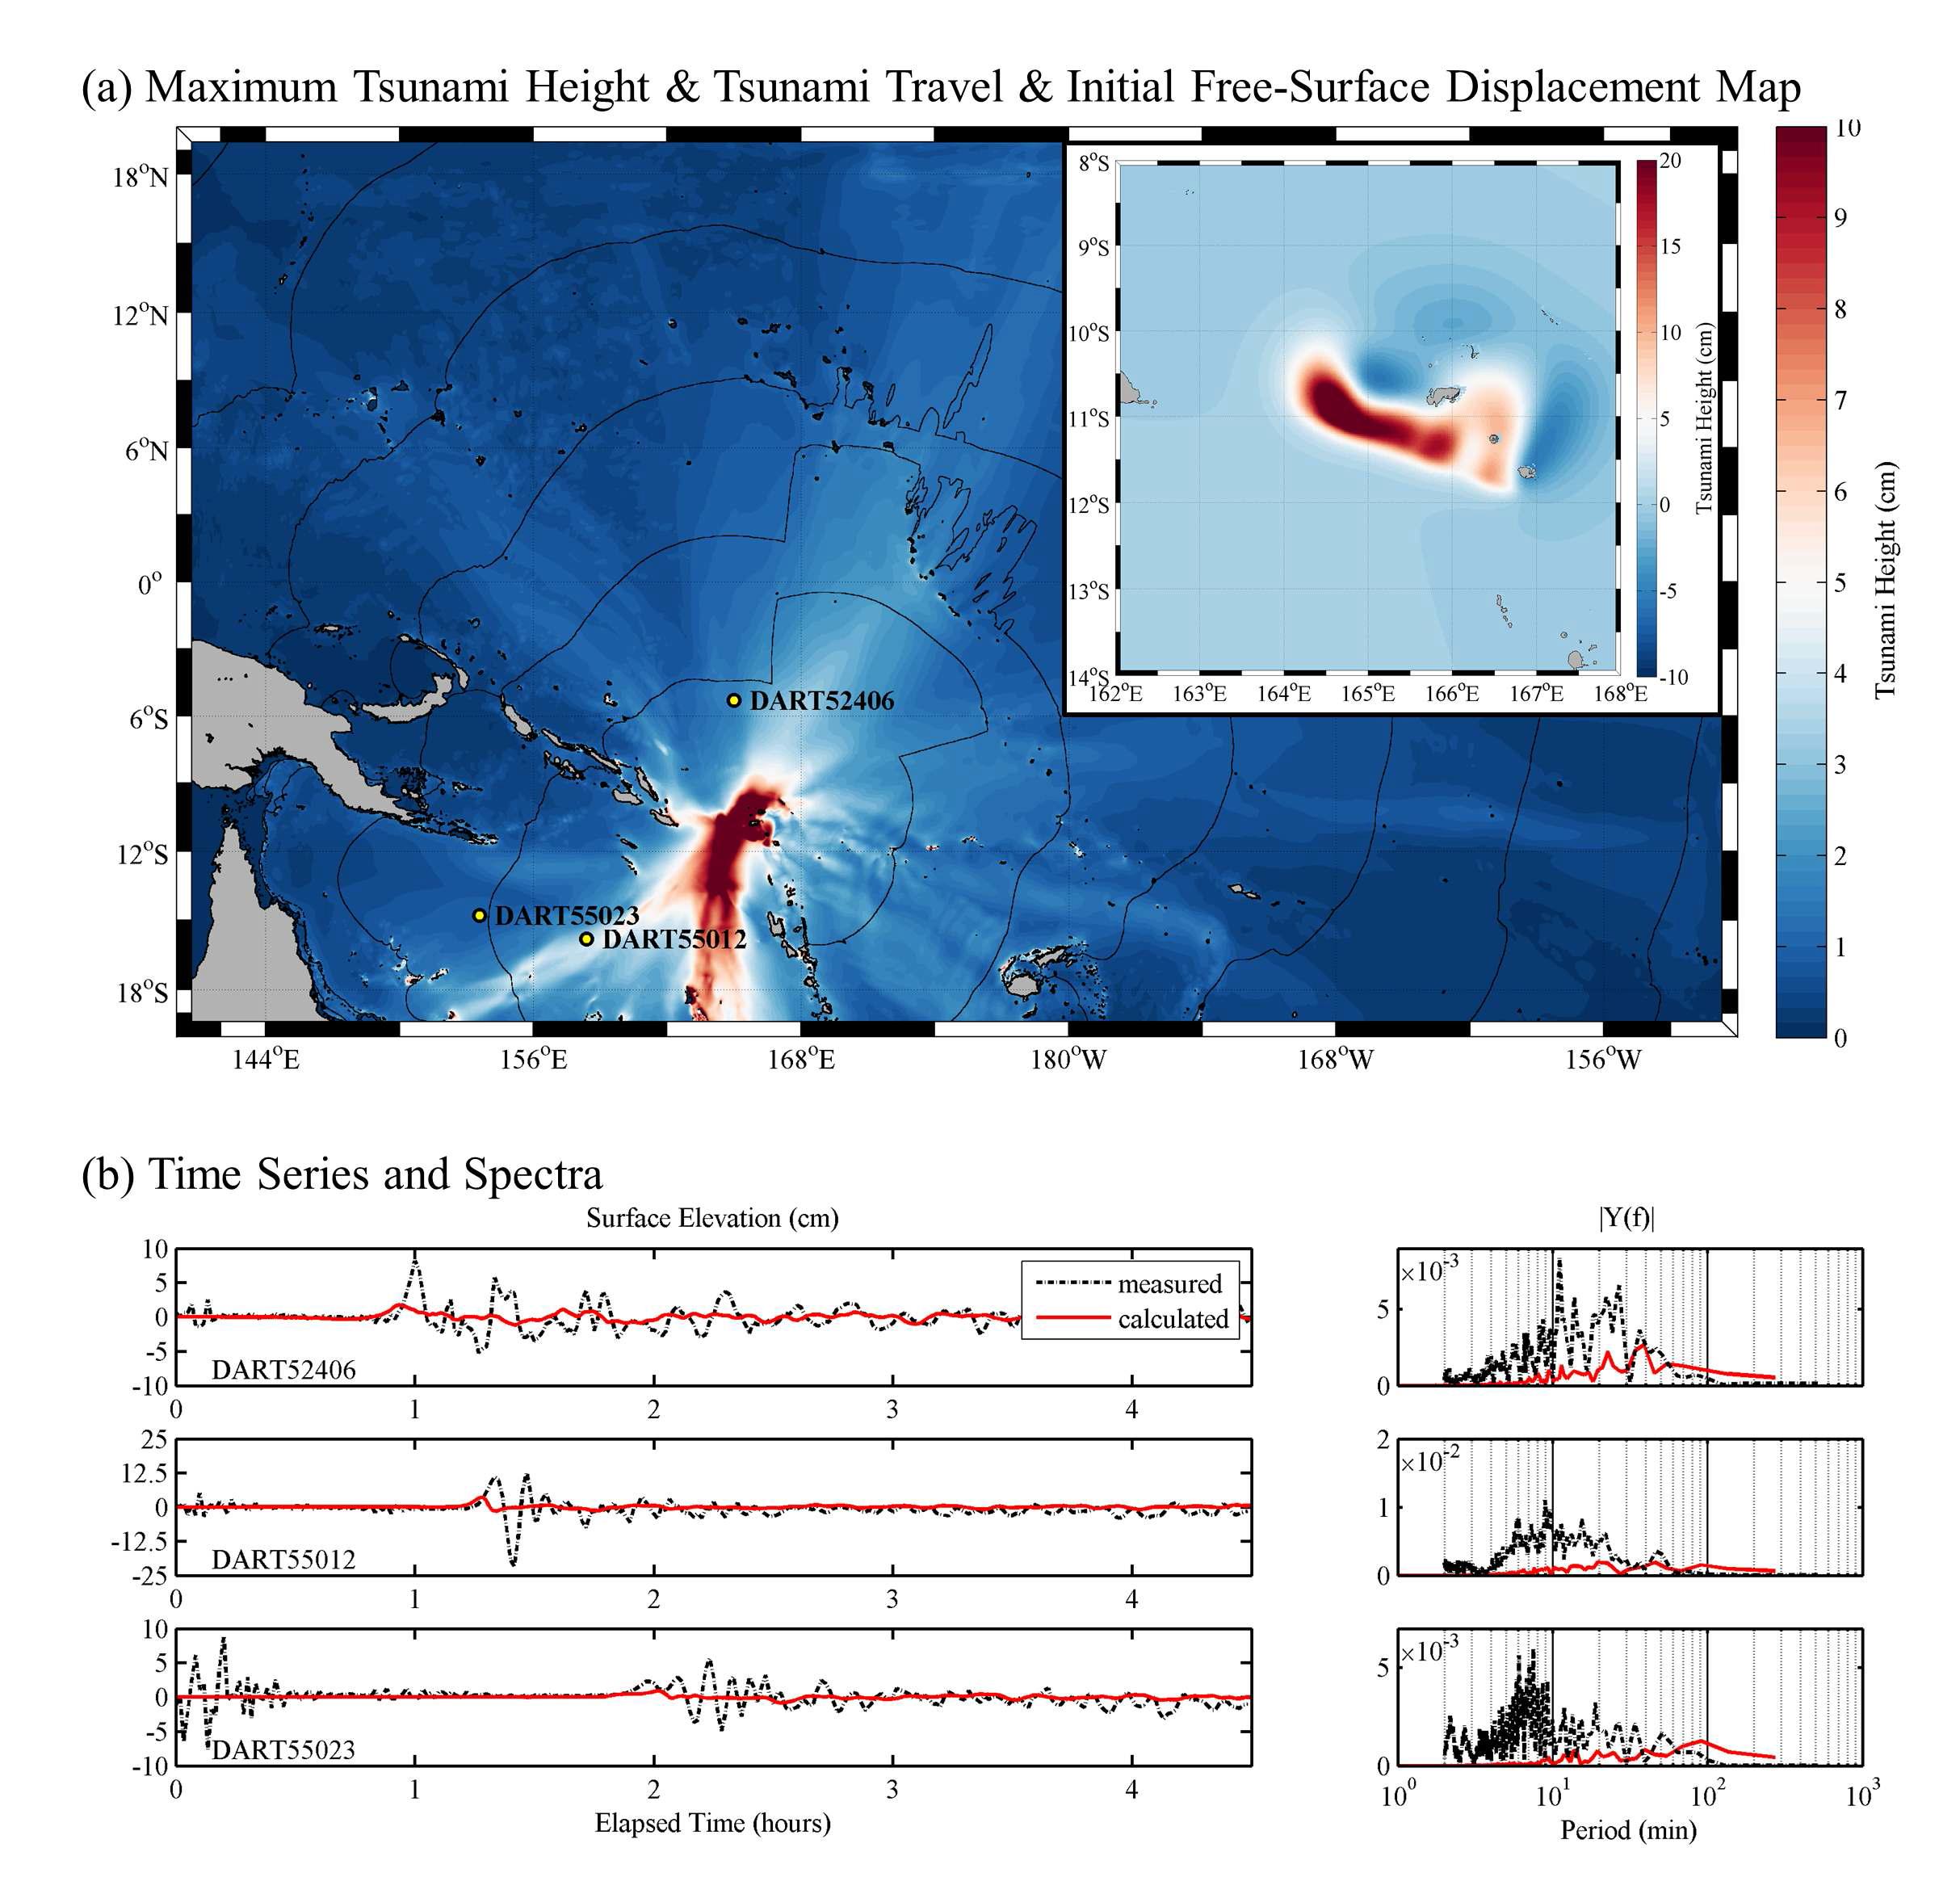 Results of the 2013 Santa Cruz tsunami simulation using the slipdistribution derived from this study.